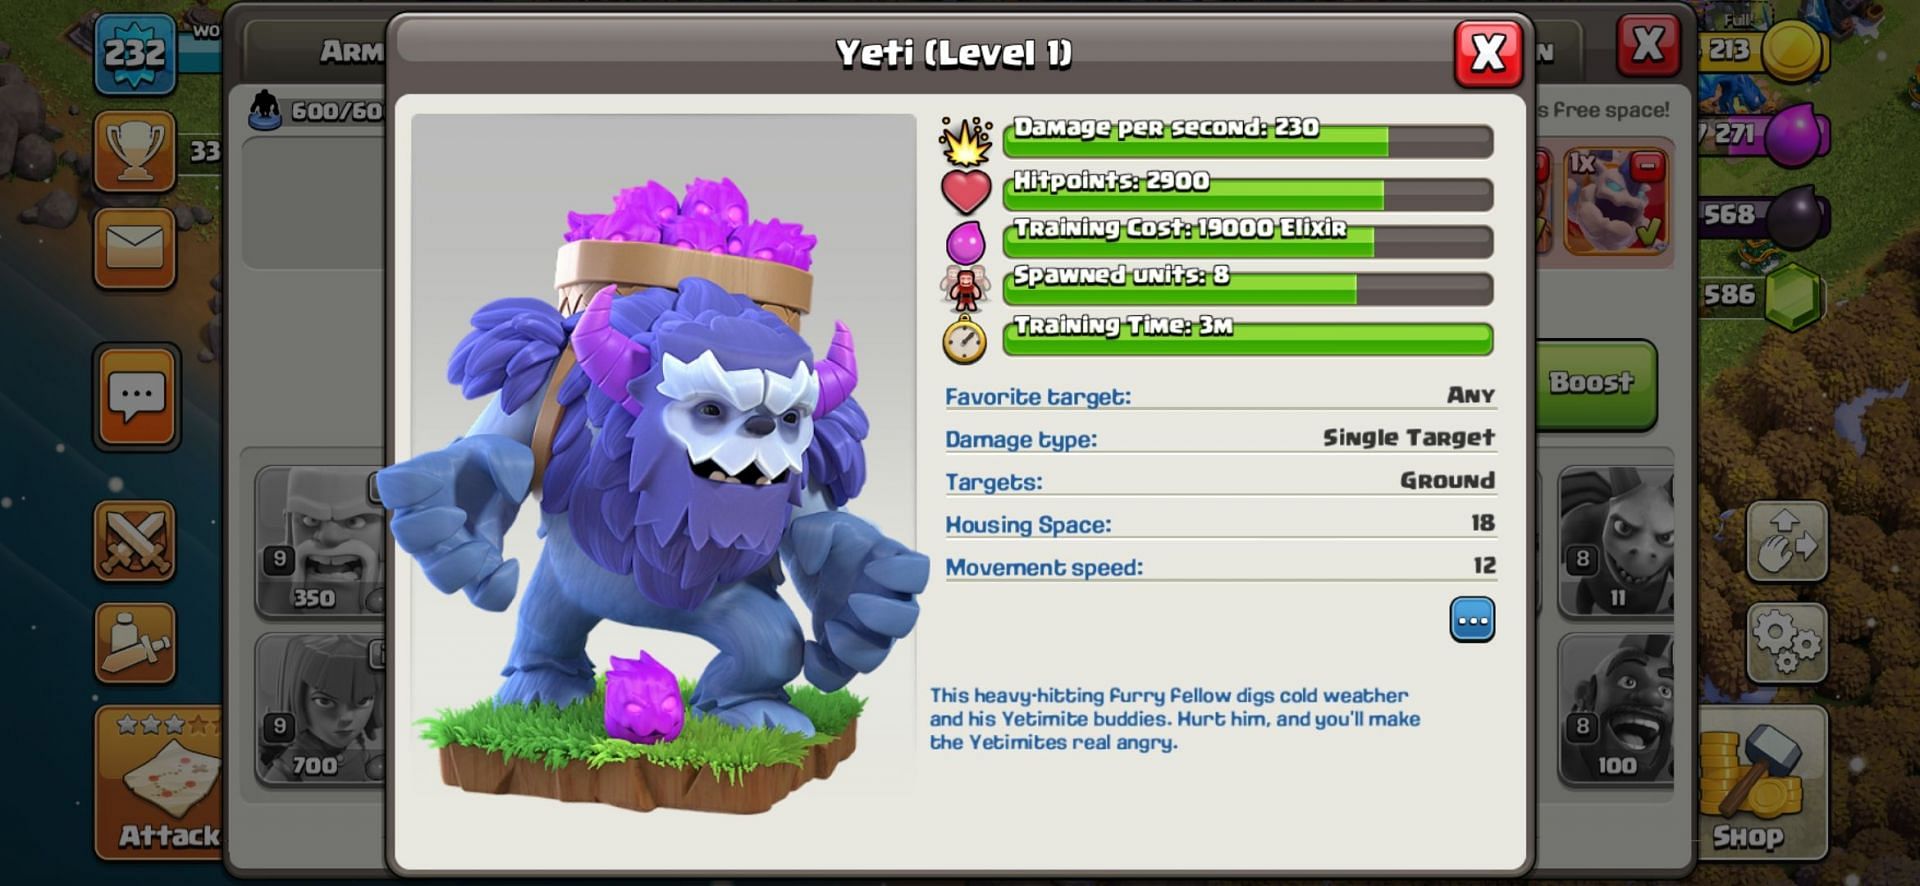 The Yeti troop in Clash of Clans (Image via Clash of Clans)